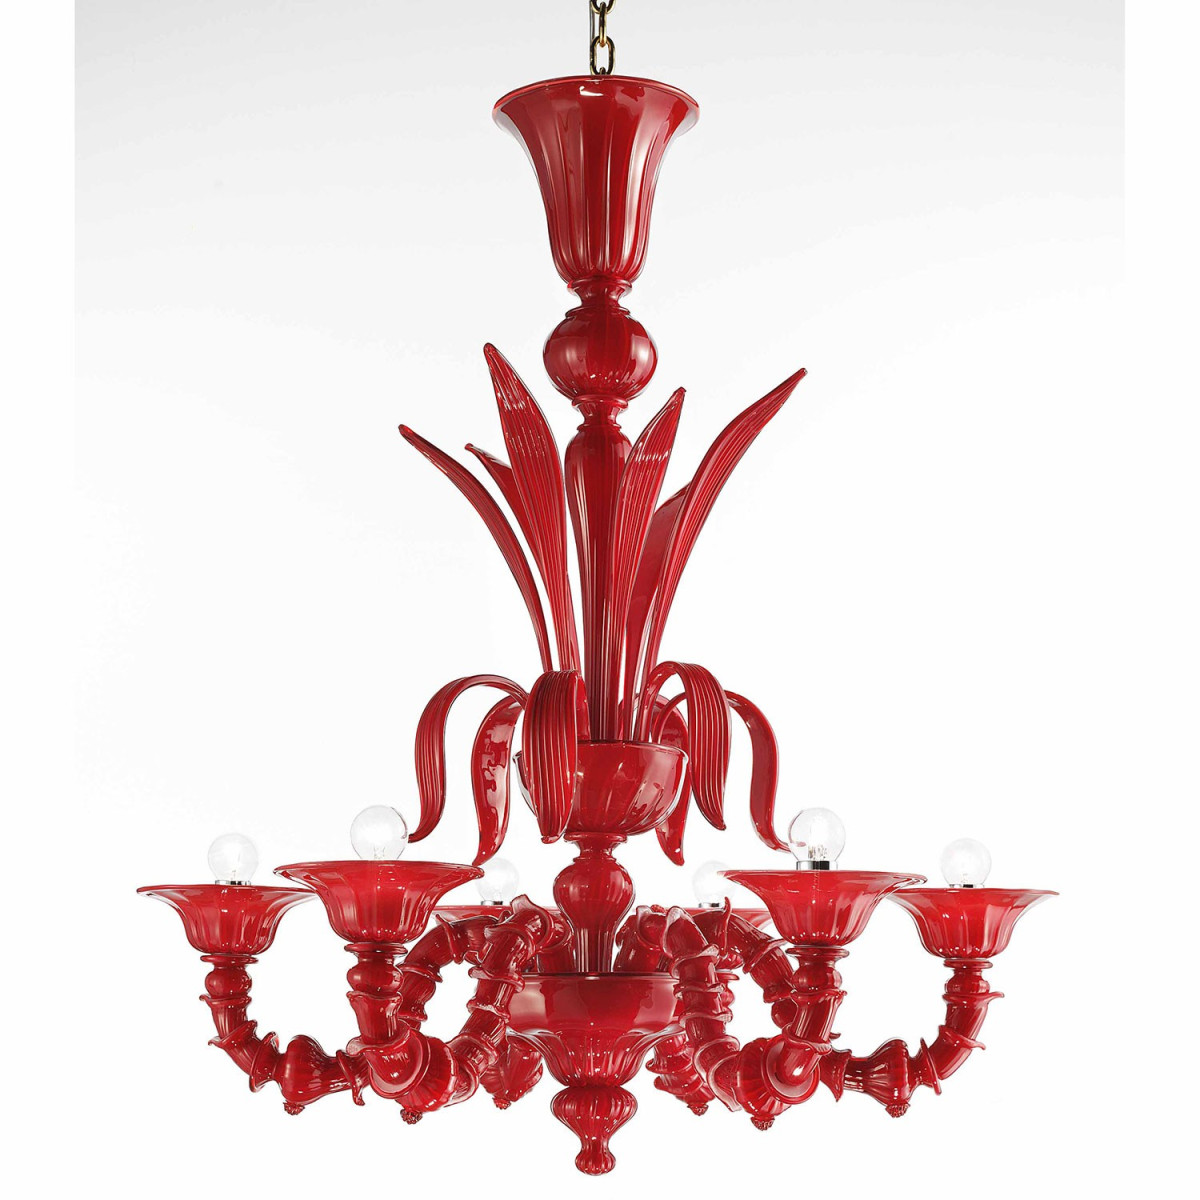 "Paradiso" coral Murano glass chandelier - 6 lights 